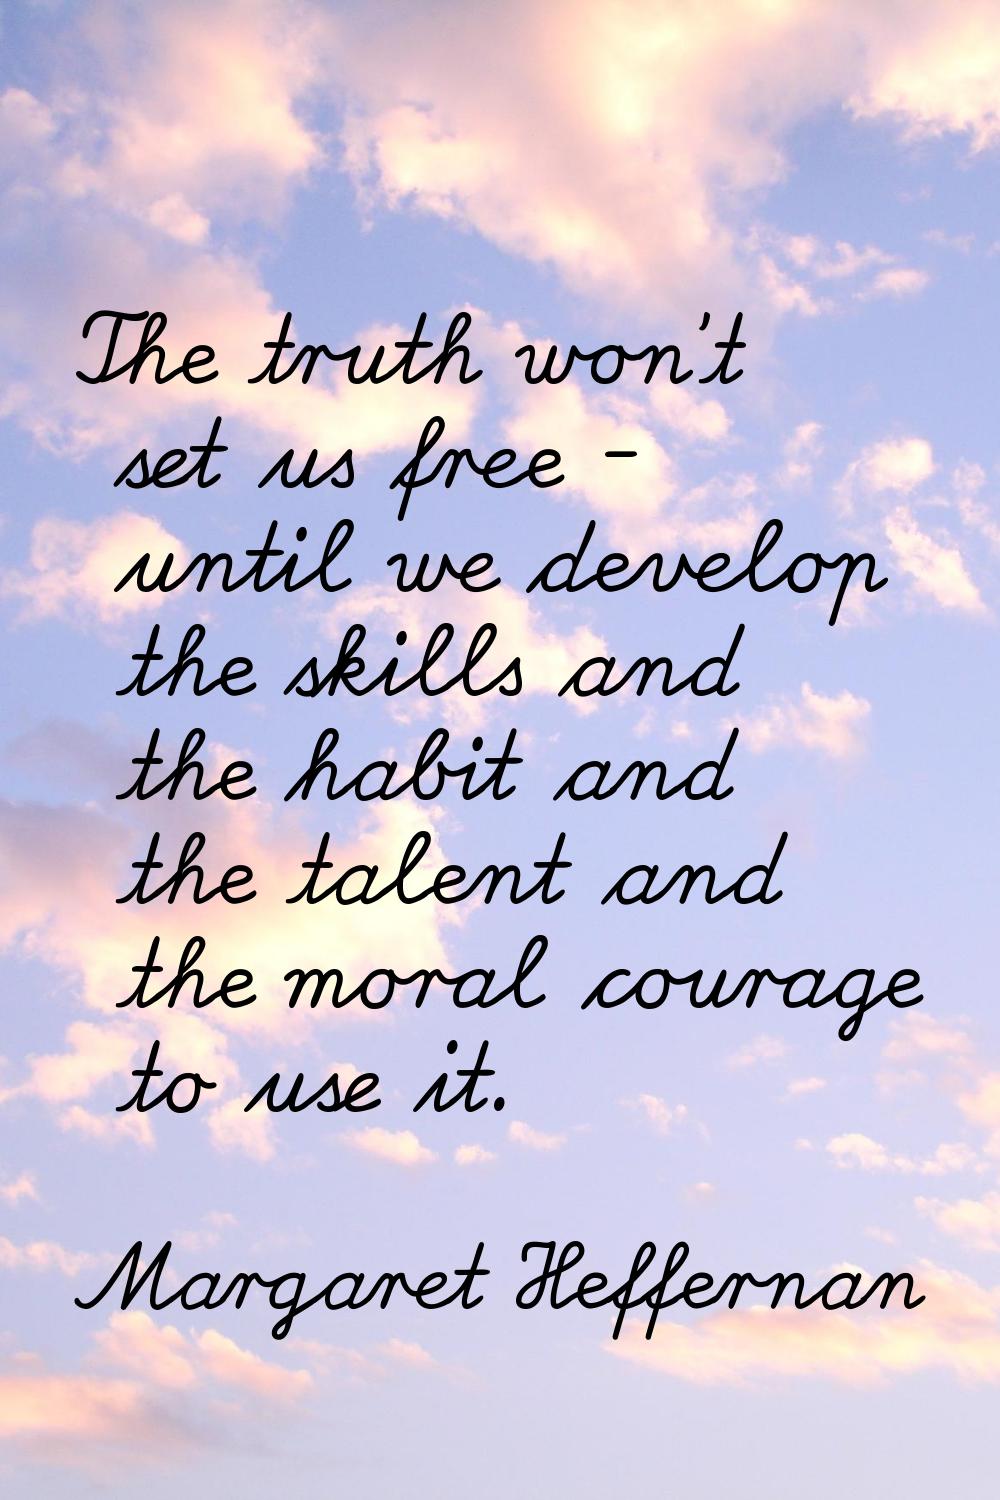 The truth won't set us free - until we develop the skills and the habit and the talent and the mora